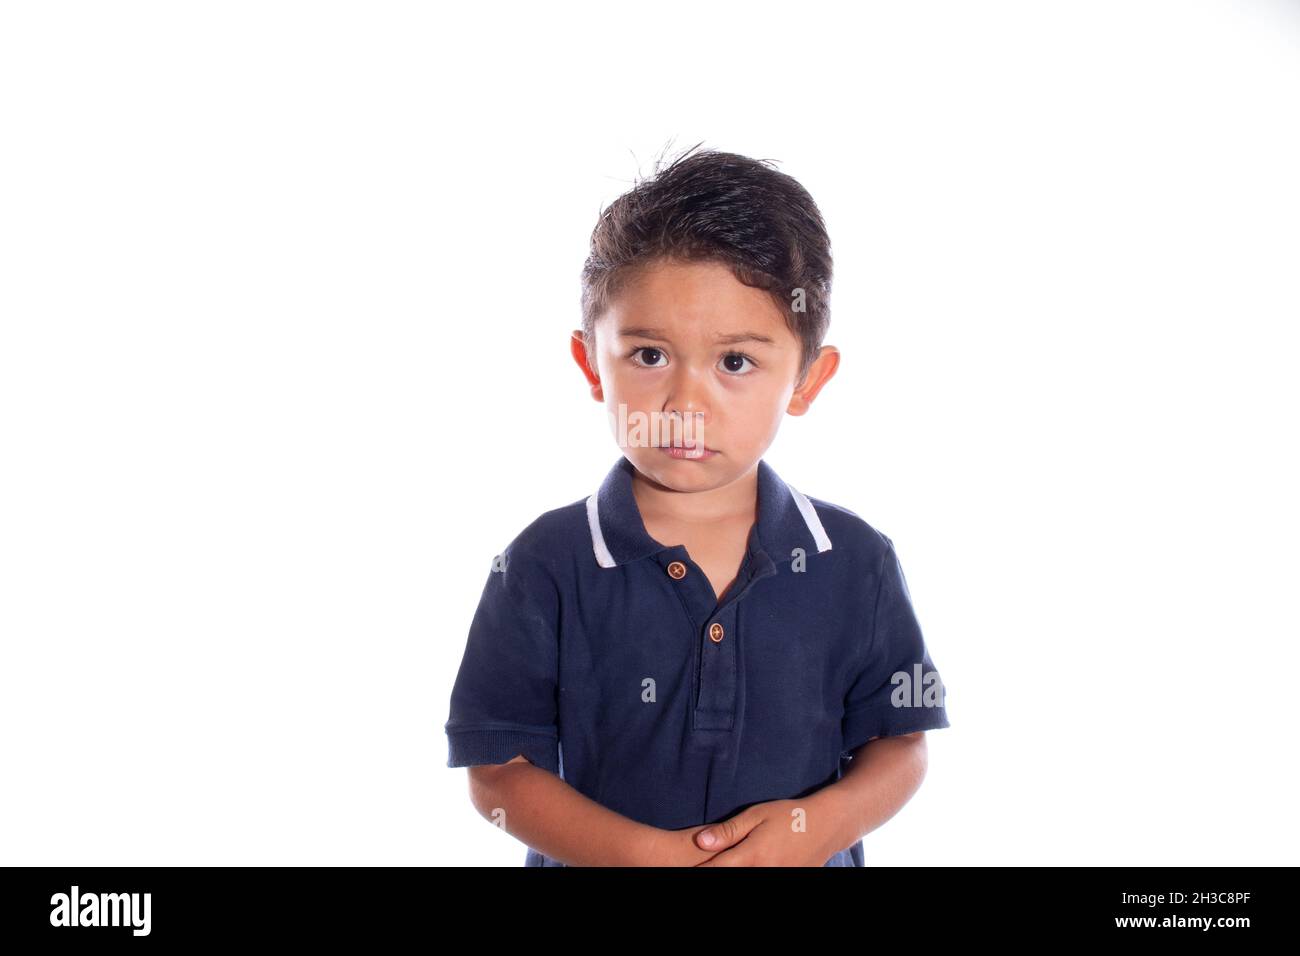 Little boy with look of sadness and regret, isolated on white background. Latin child afraid of being punished. Being reprimanded. Stock Photo